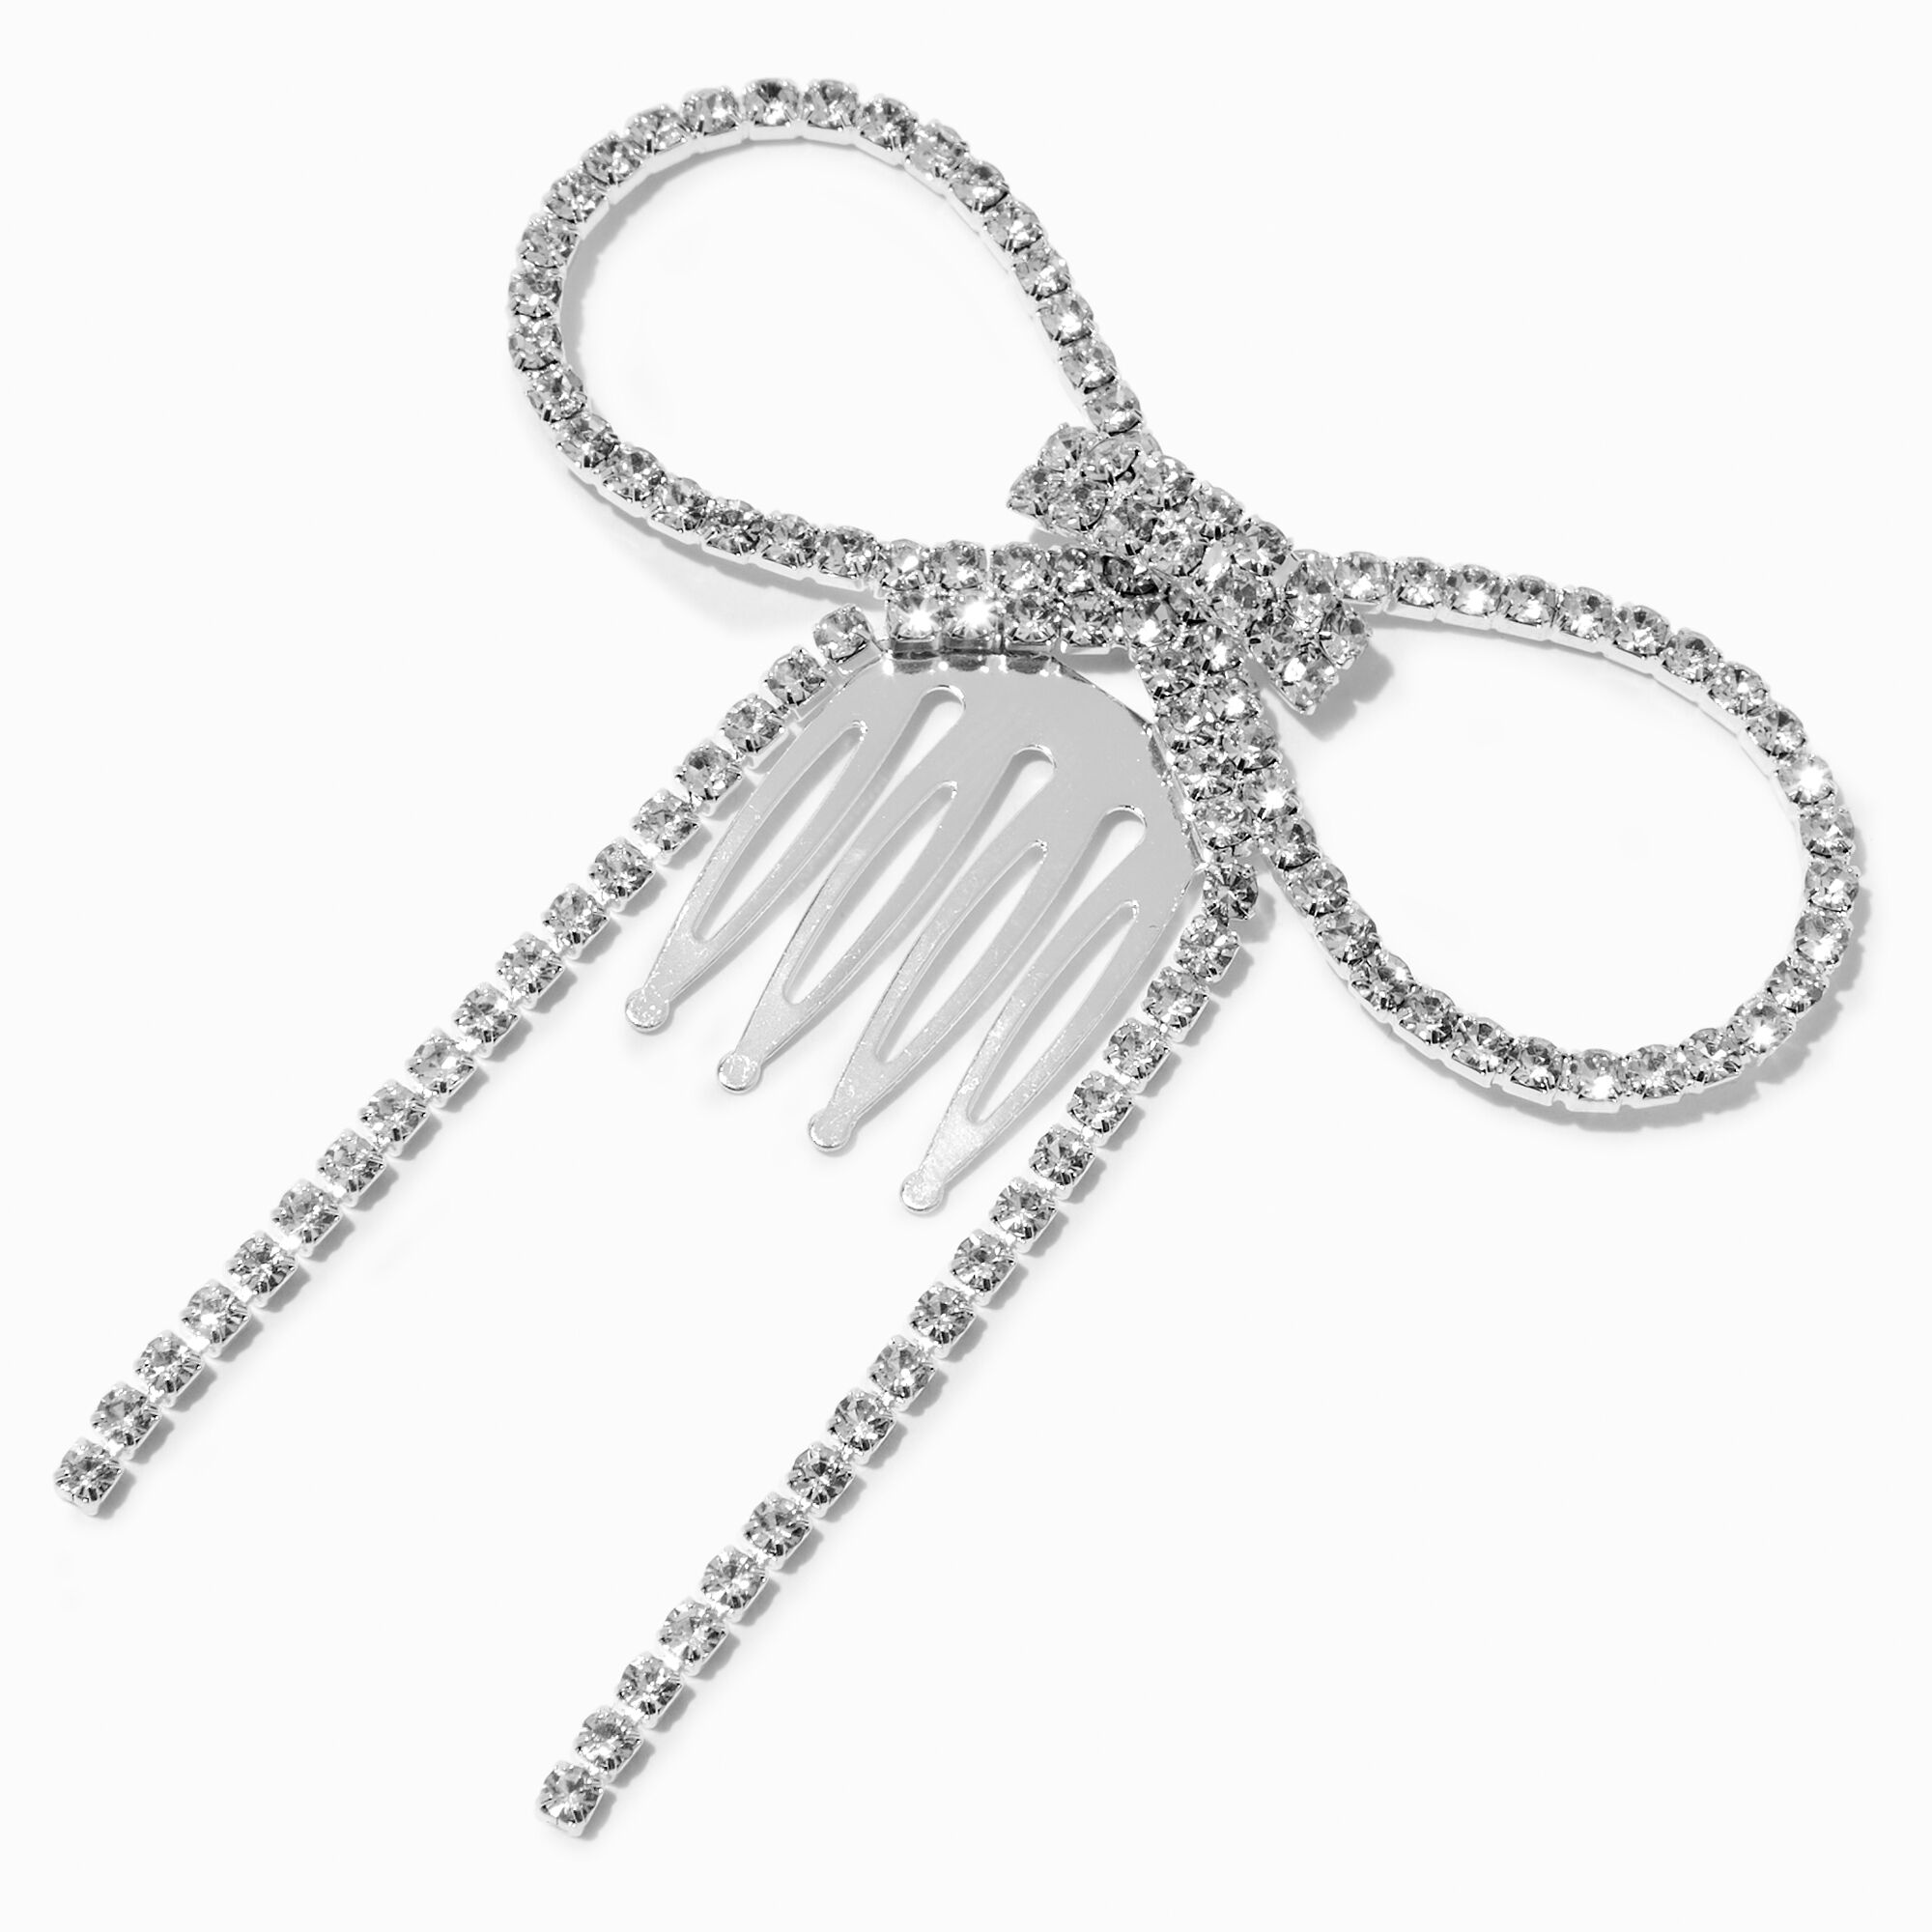 View Claires Tone Rhinestone Bow Hair Comb Silver information